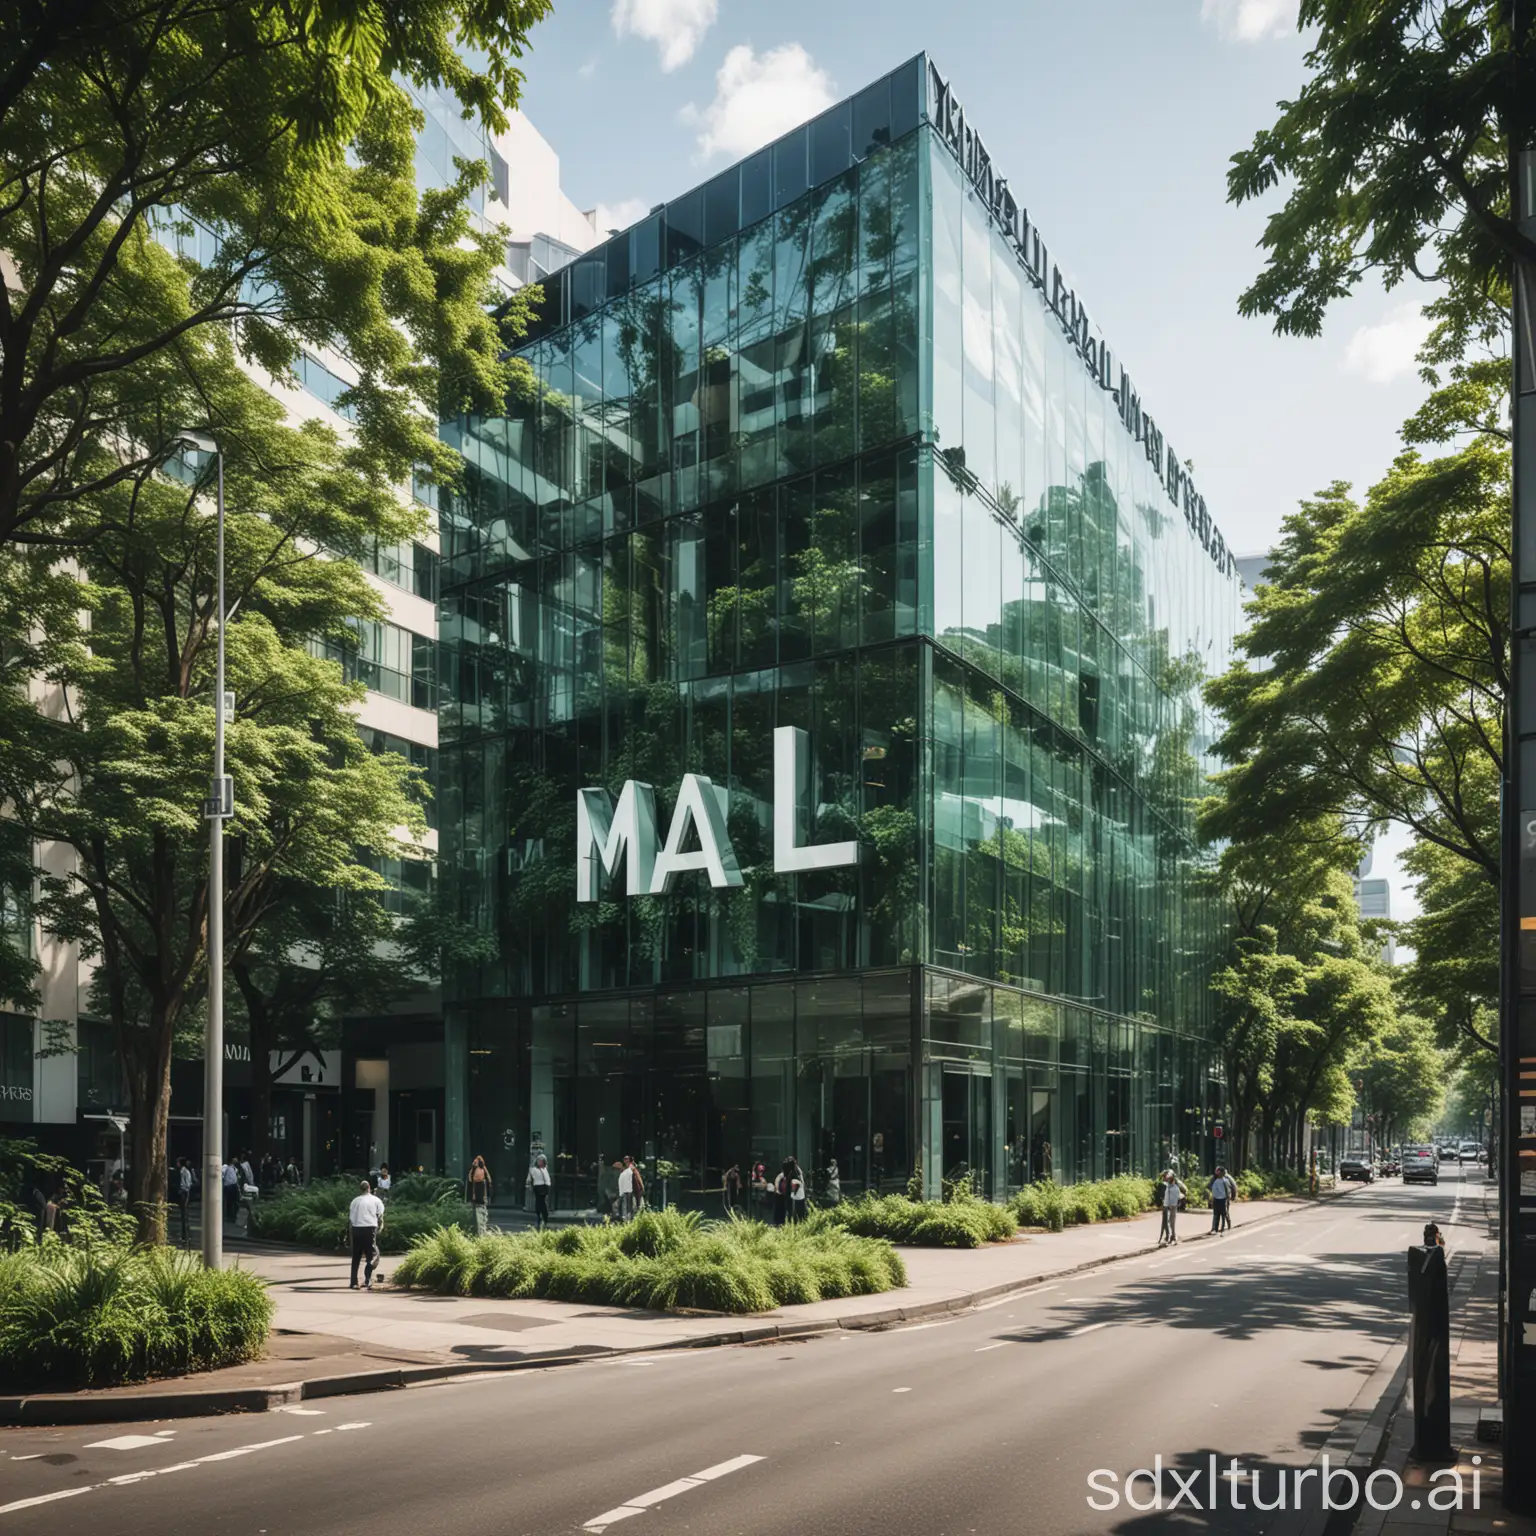 Modern-Glass-Office-Building-in-Bustling-City-with-Mall-Sign